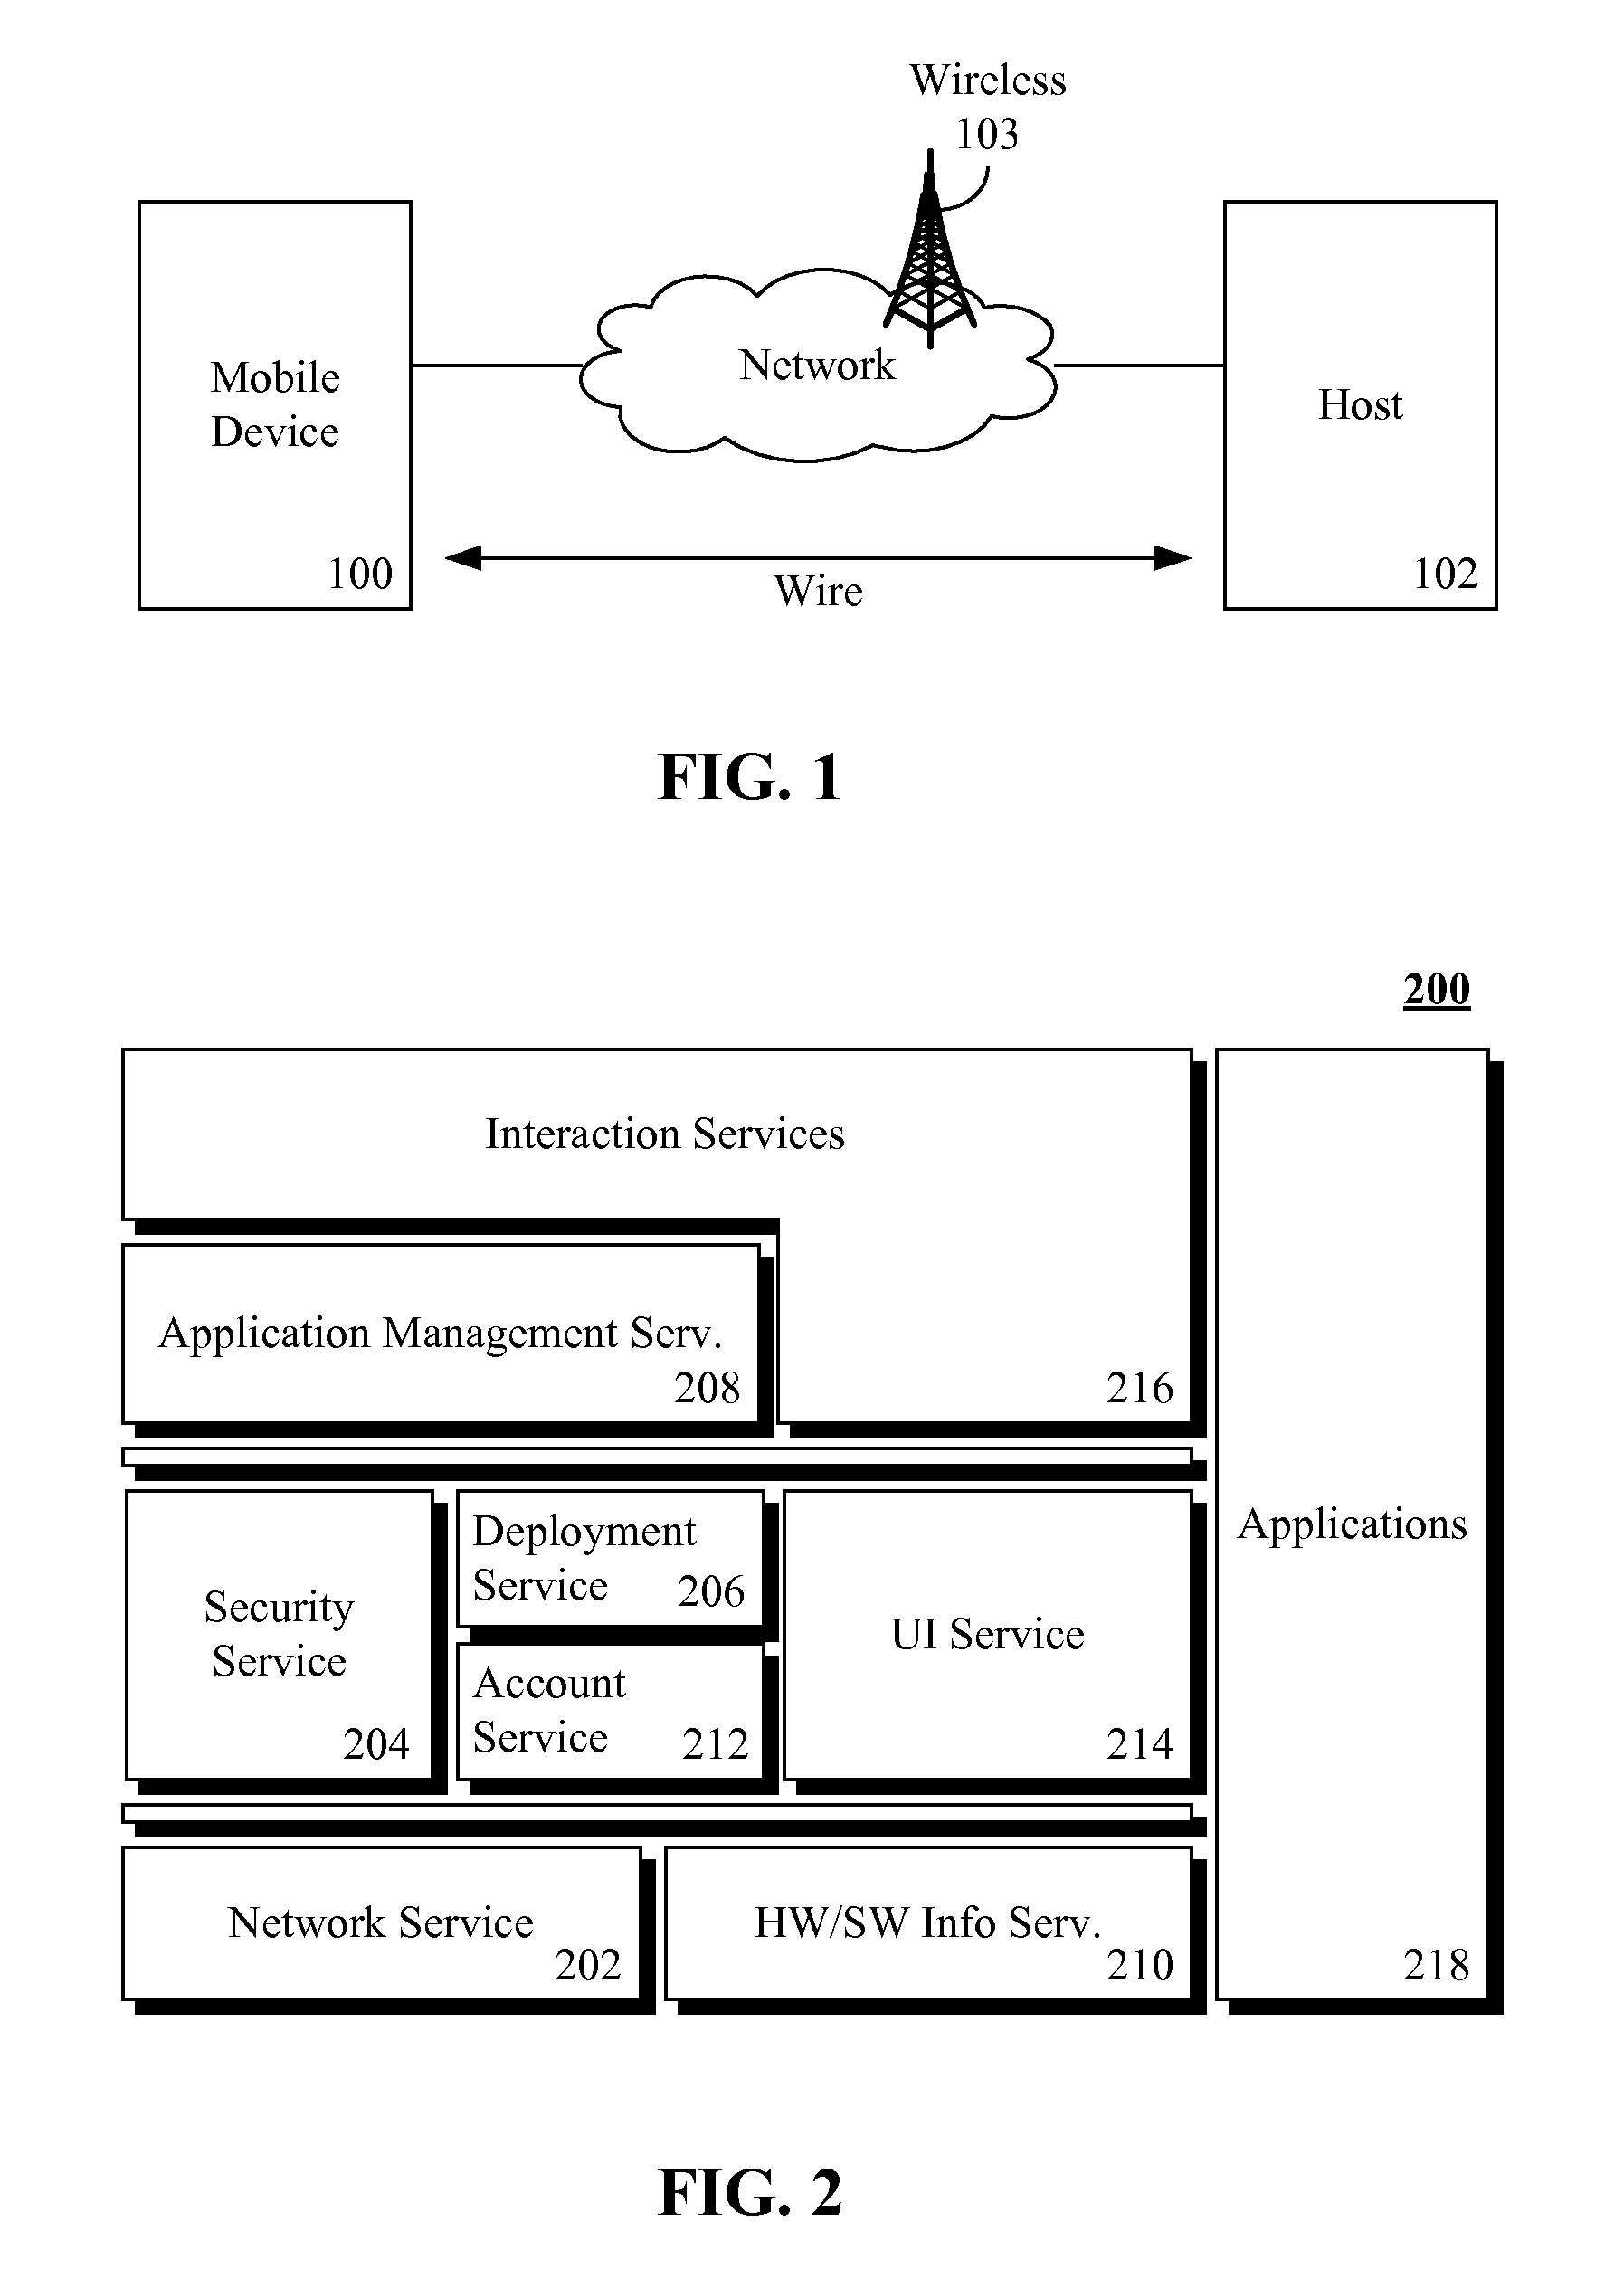 Auto-deploying an application from a mobile device to a host in a pervasive computing environment